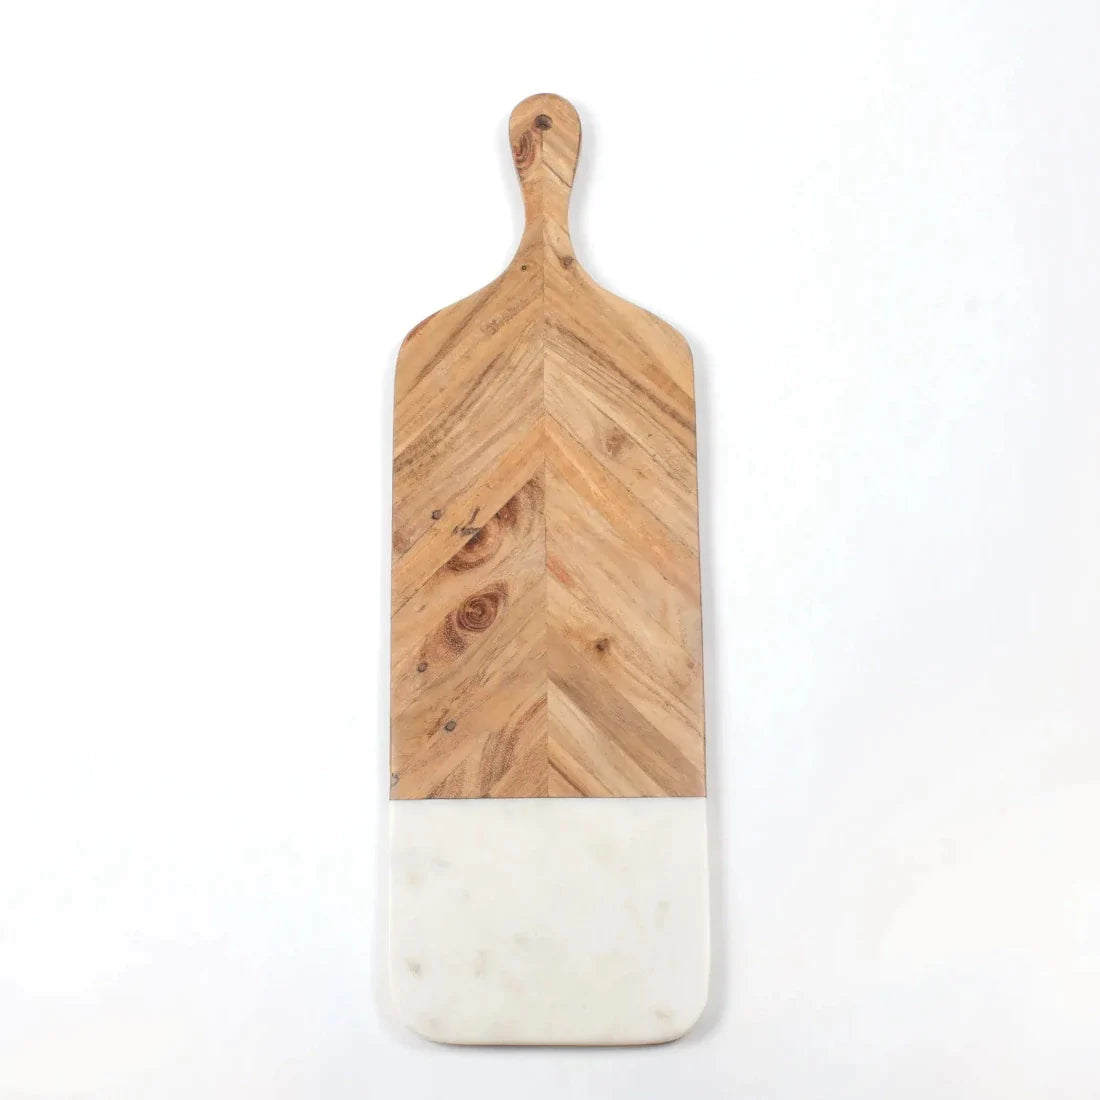 marble and wood serving board